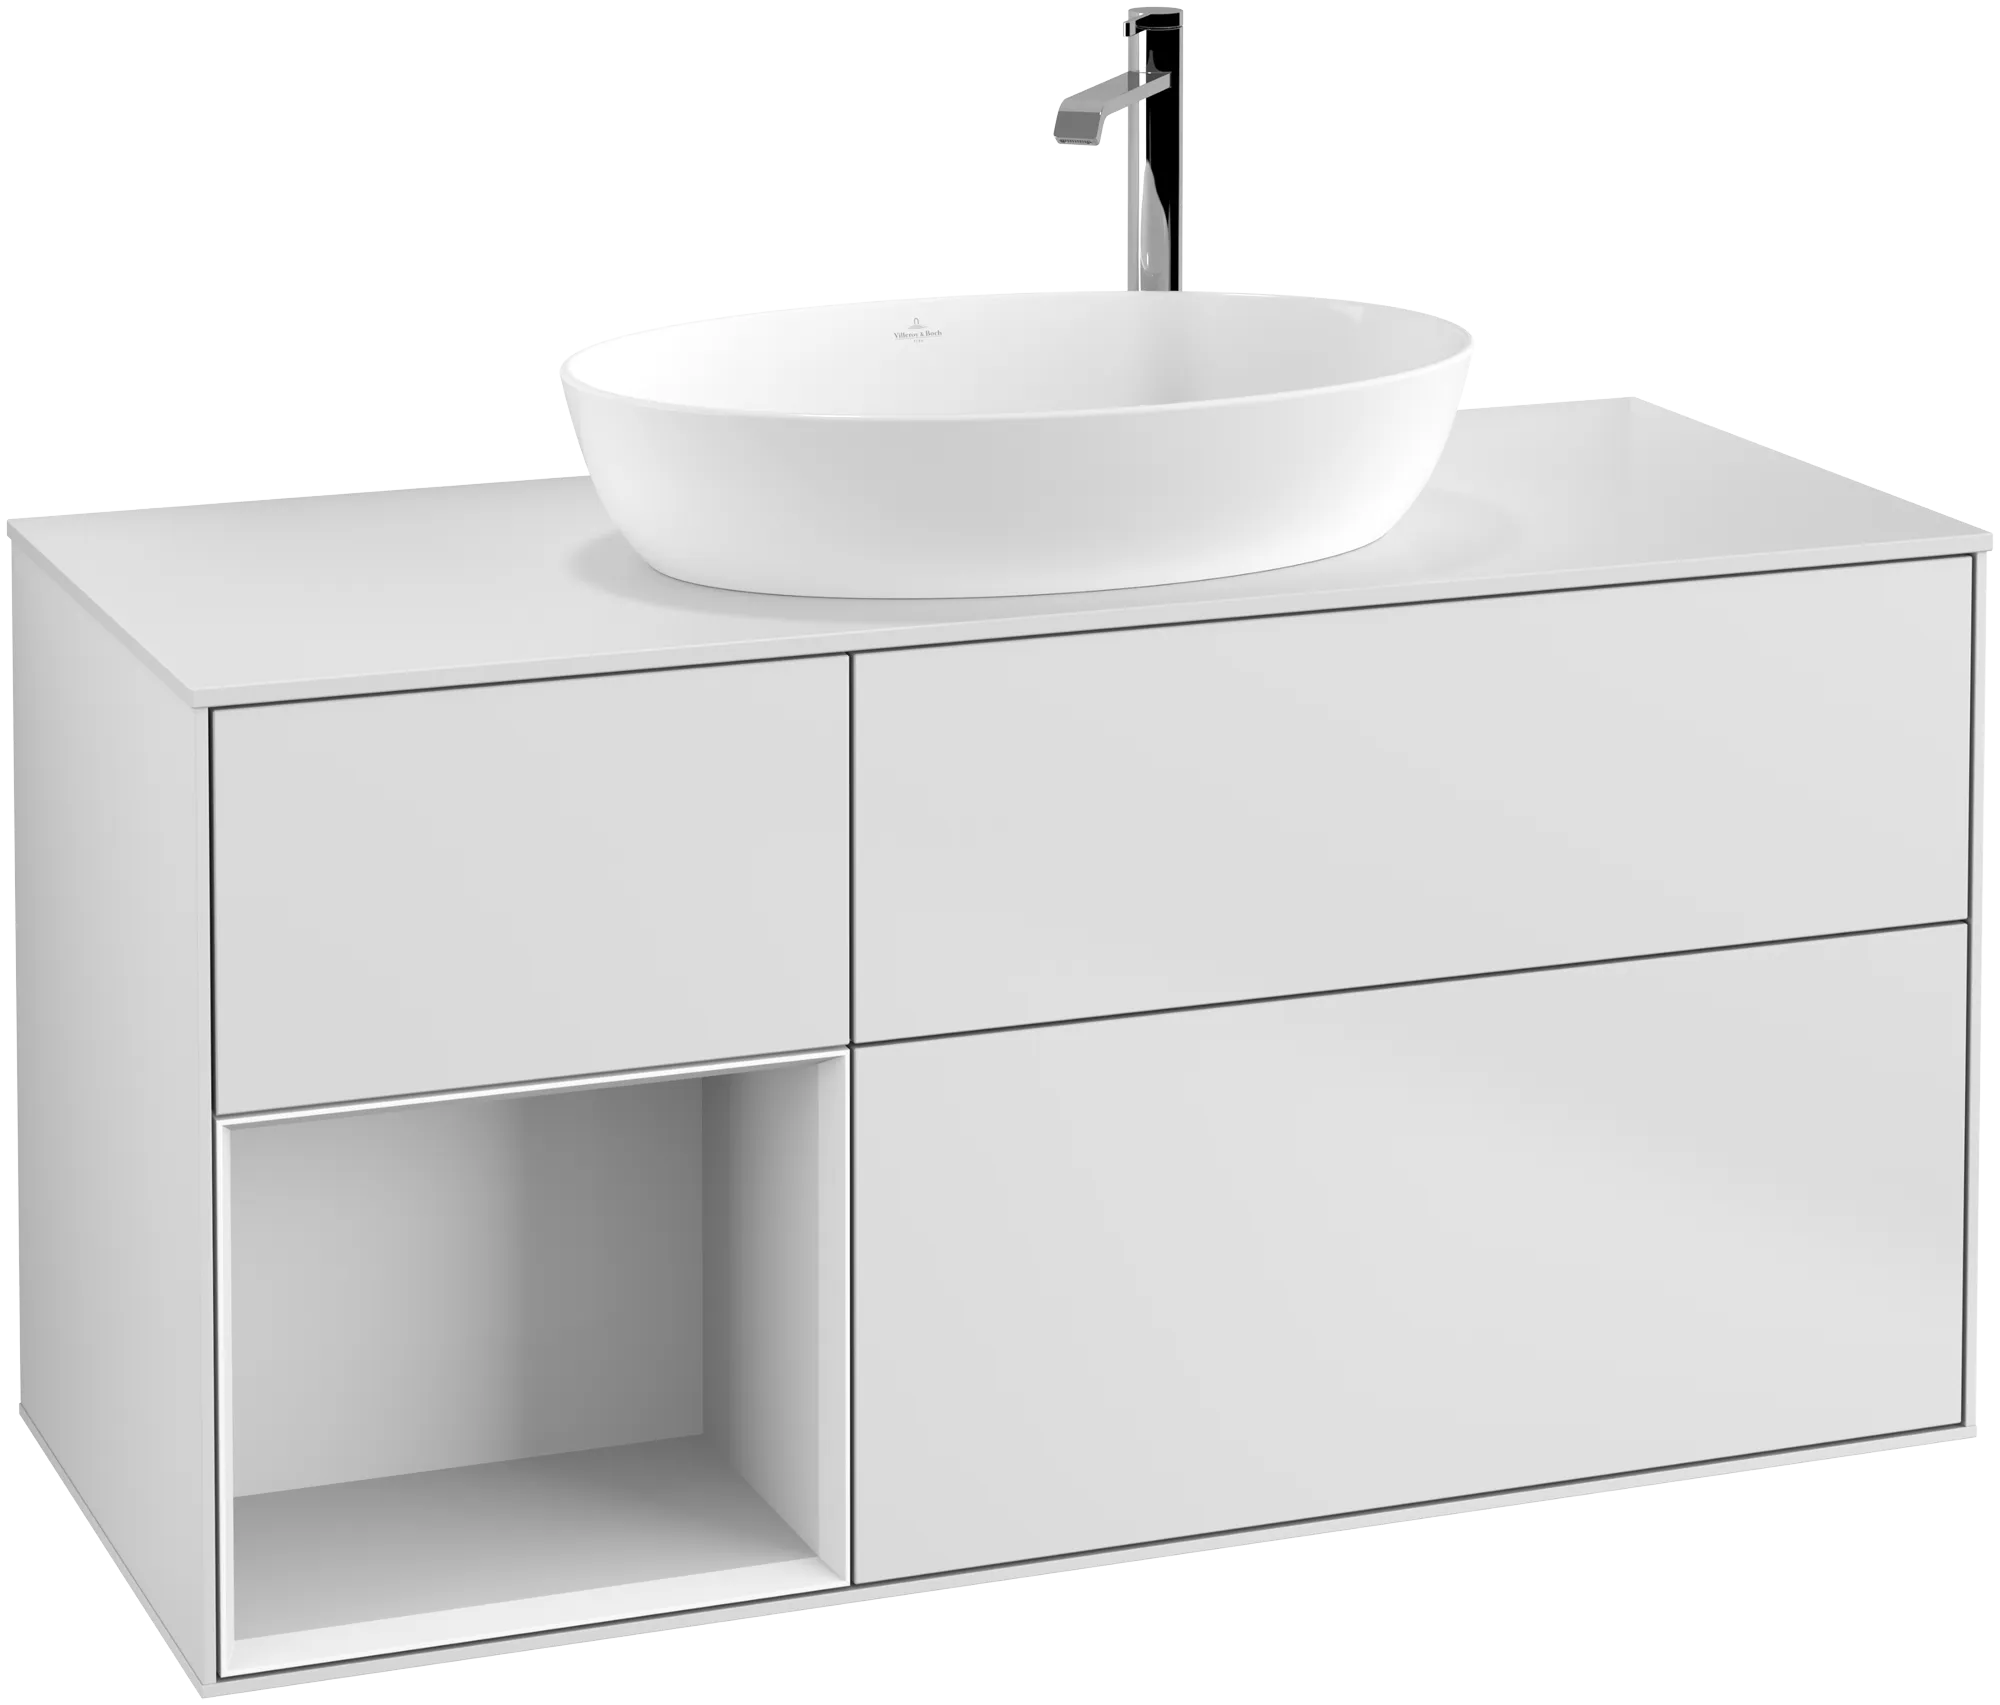 Picture of VILLEROY BOCH Finion Vanity unit, with lighting, 3 pull-out compartments, 1200 x 603 x 501 mm, White Matt Lacquer / Glossy White Lacquer / Glass White Matt #G941GFMT